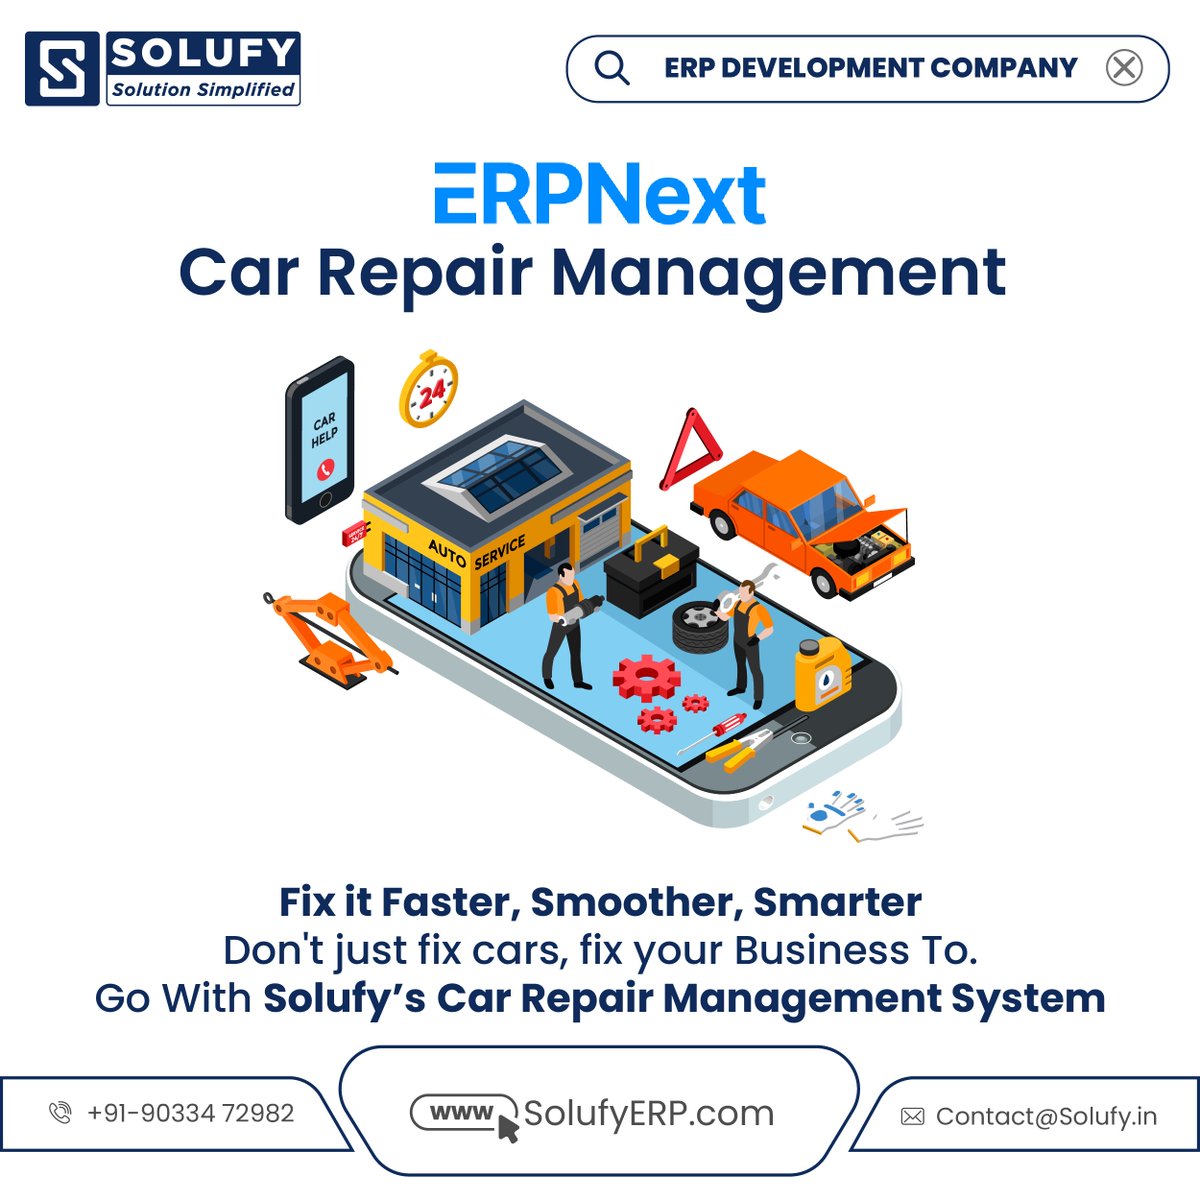 Introducing our #CarRepairManagement App! Tailored for auto workshops, it streamlines operations for enhanced productivity. From service repairs to spare parts management, we've got you covered. #AutoService #GarageManagement #ERPNext

🛒 Buy Now:
app.solufyerp.com/products/car-r…